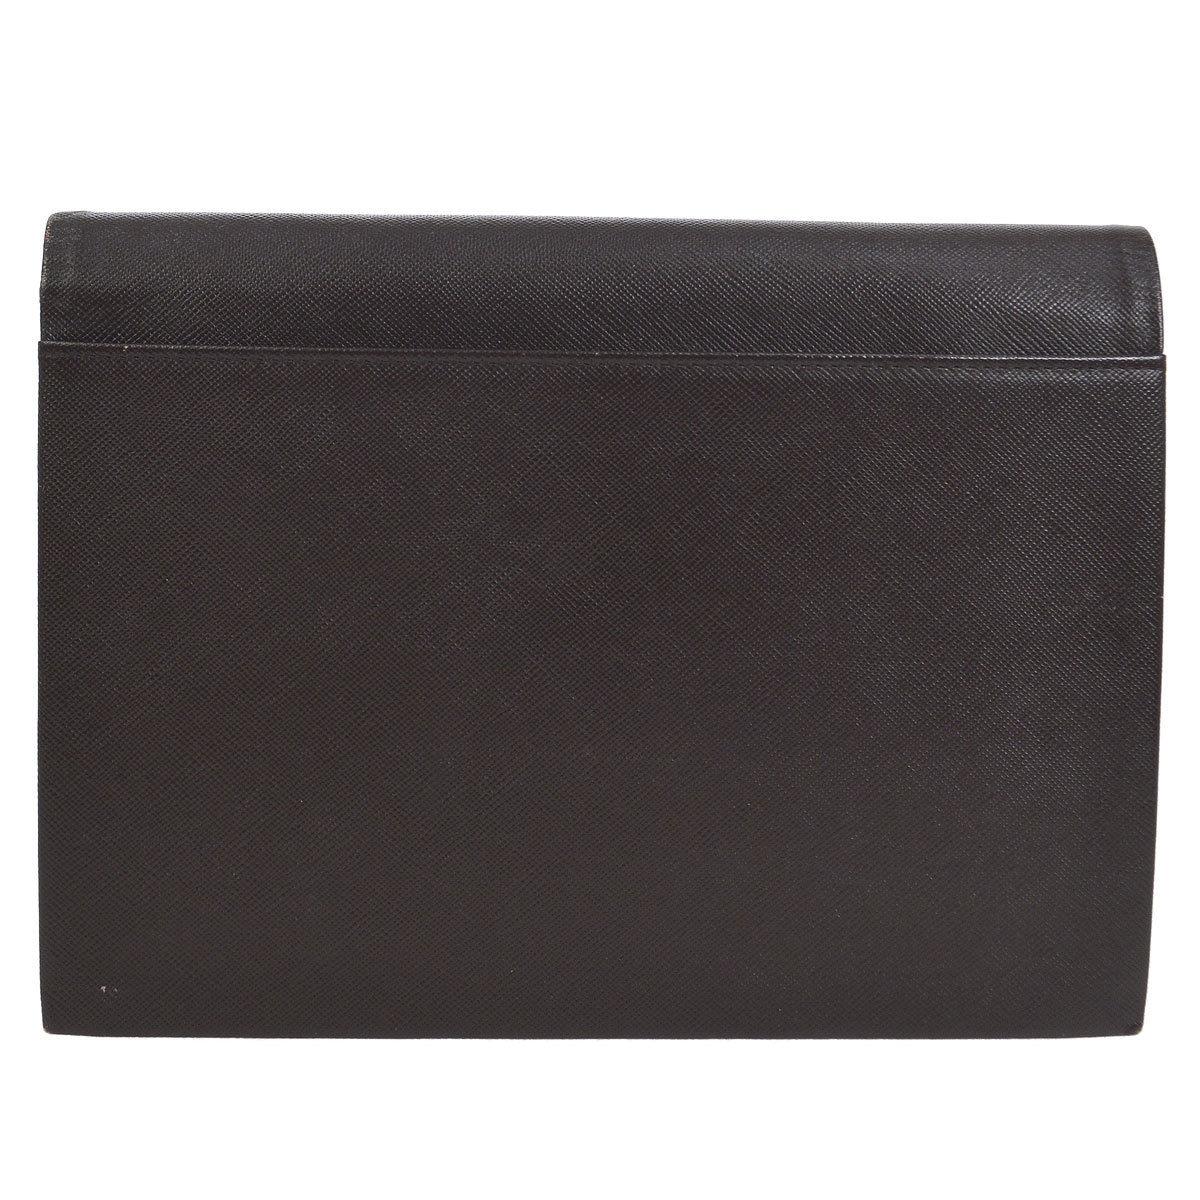 YSL Chocolate Brown Leather Envelope Evening Flap Clutch Bag

Leather
Twill lining
Button closure 
Measures 9.5